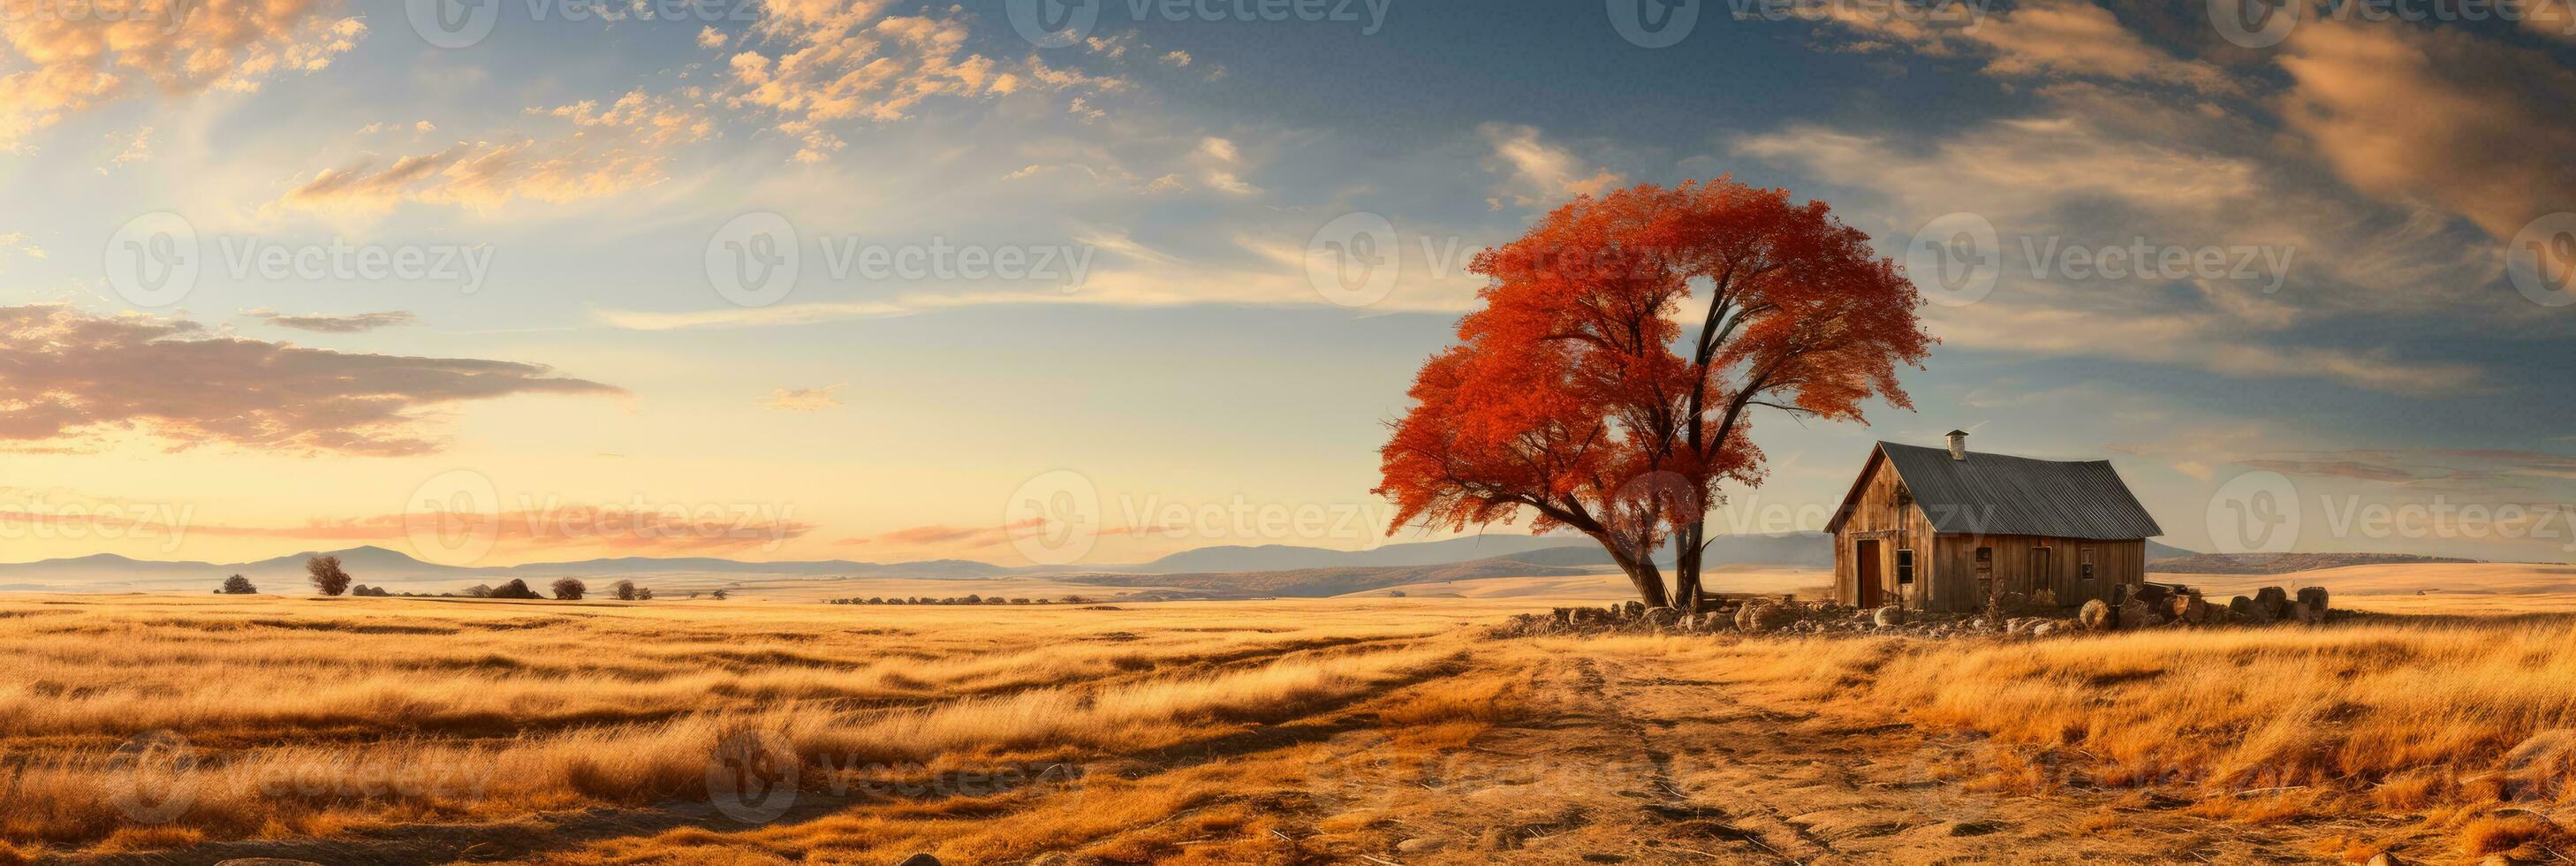 Old farm harvest scene enveloped in rustic hues of barn red wheat gold and chestnut brown photo